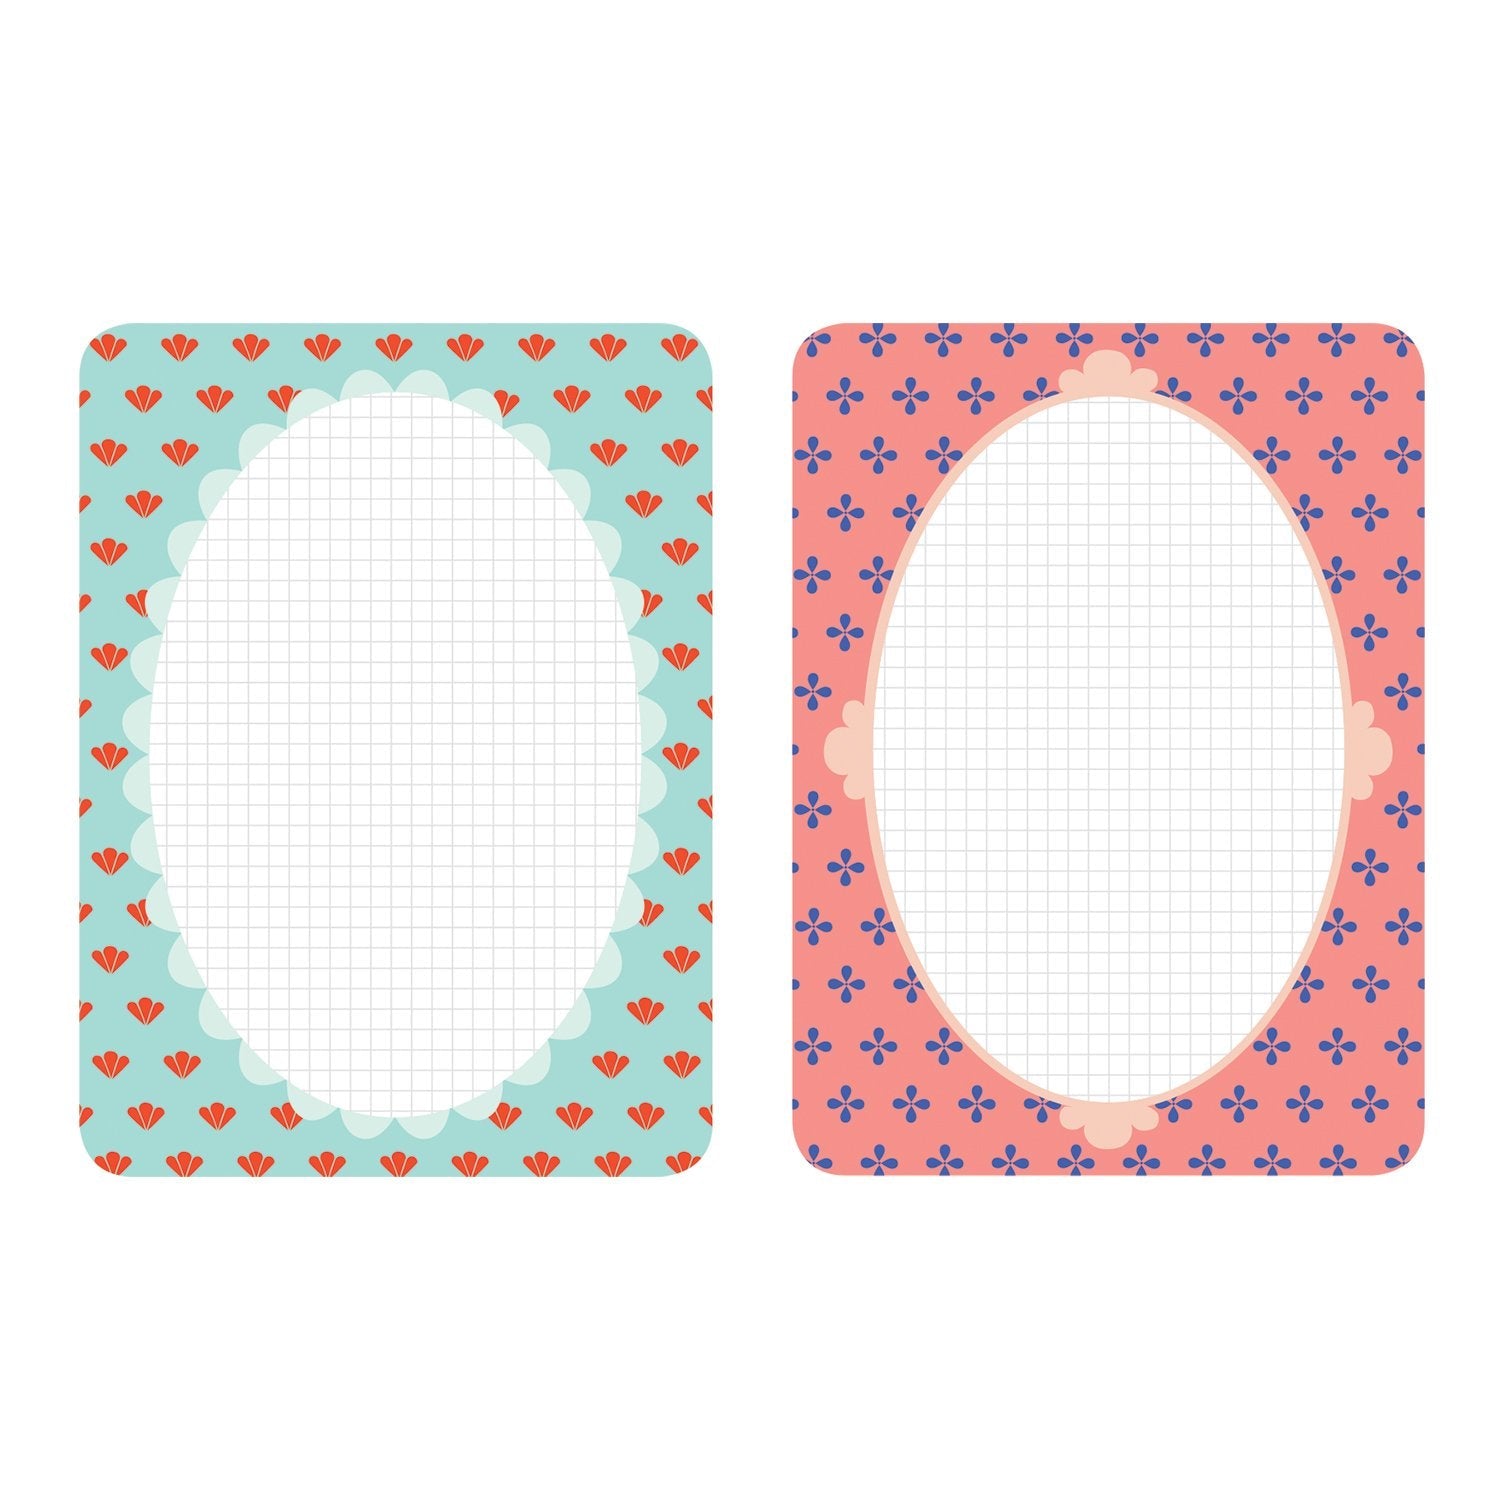 10+ Thousand Cute Sticky Note Royalty-Free Images, Stock Photos